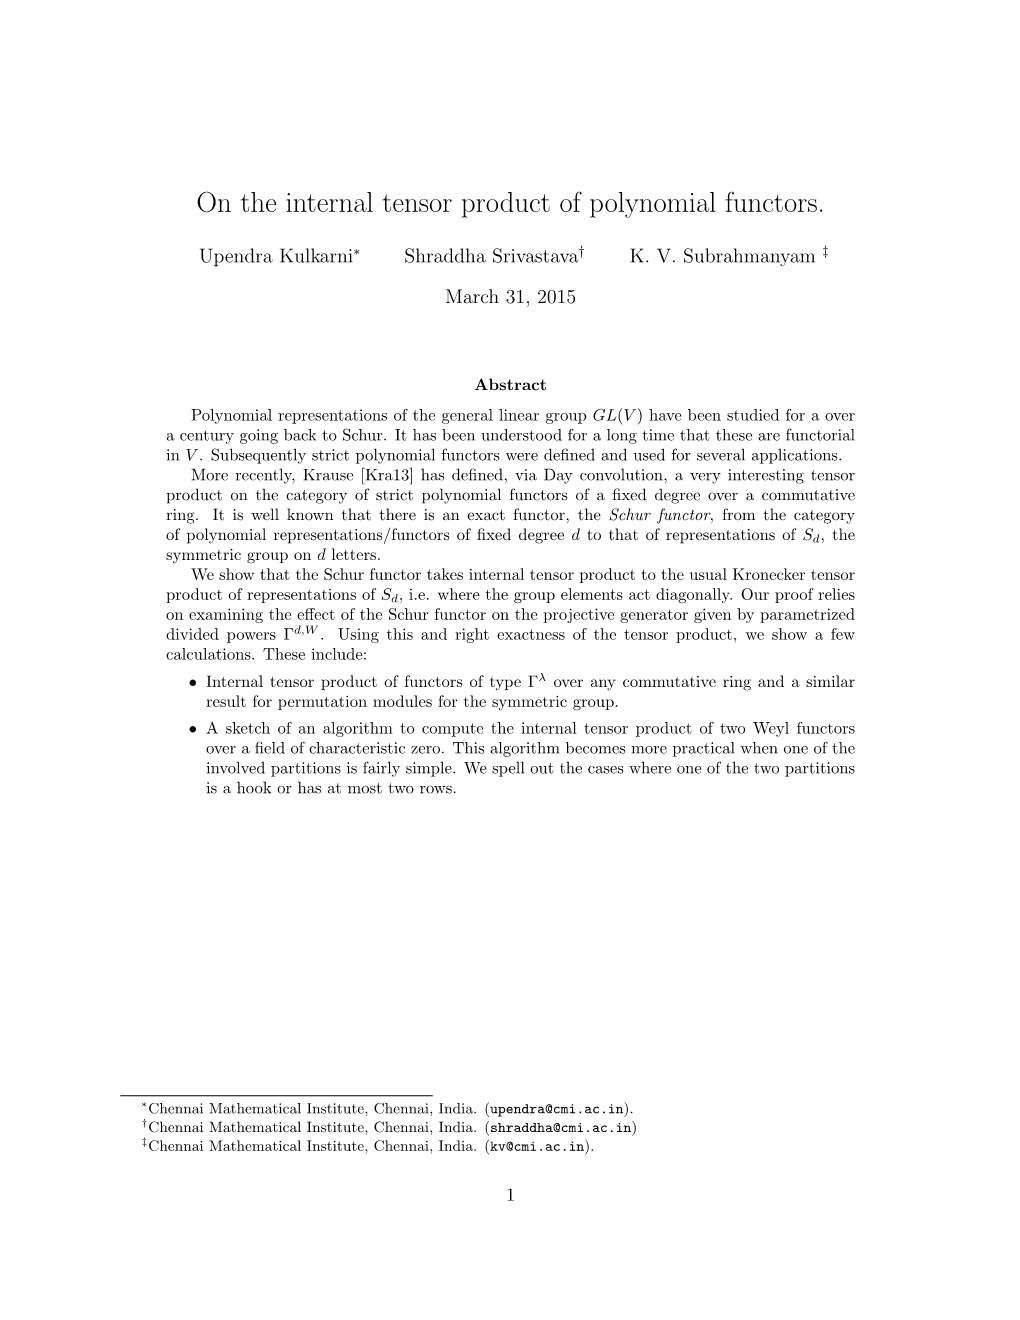 On the Internal Tensor Product of Polynomial Functors